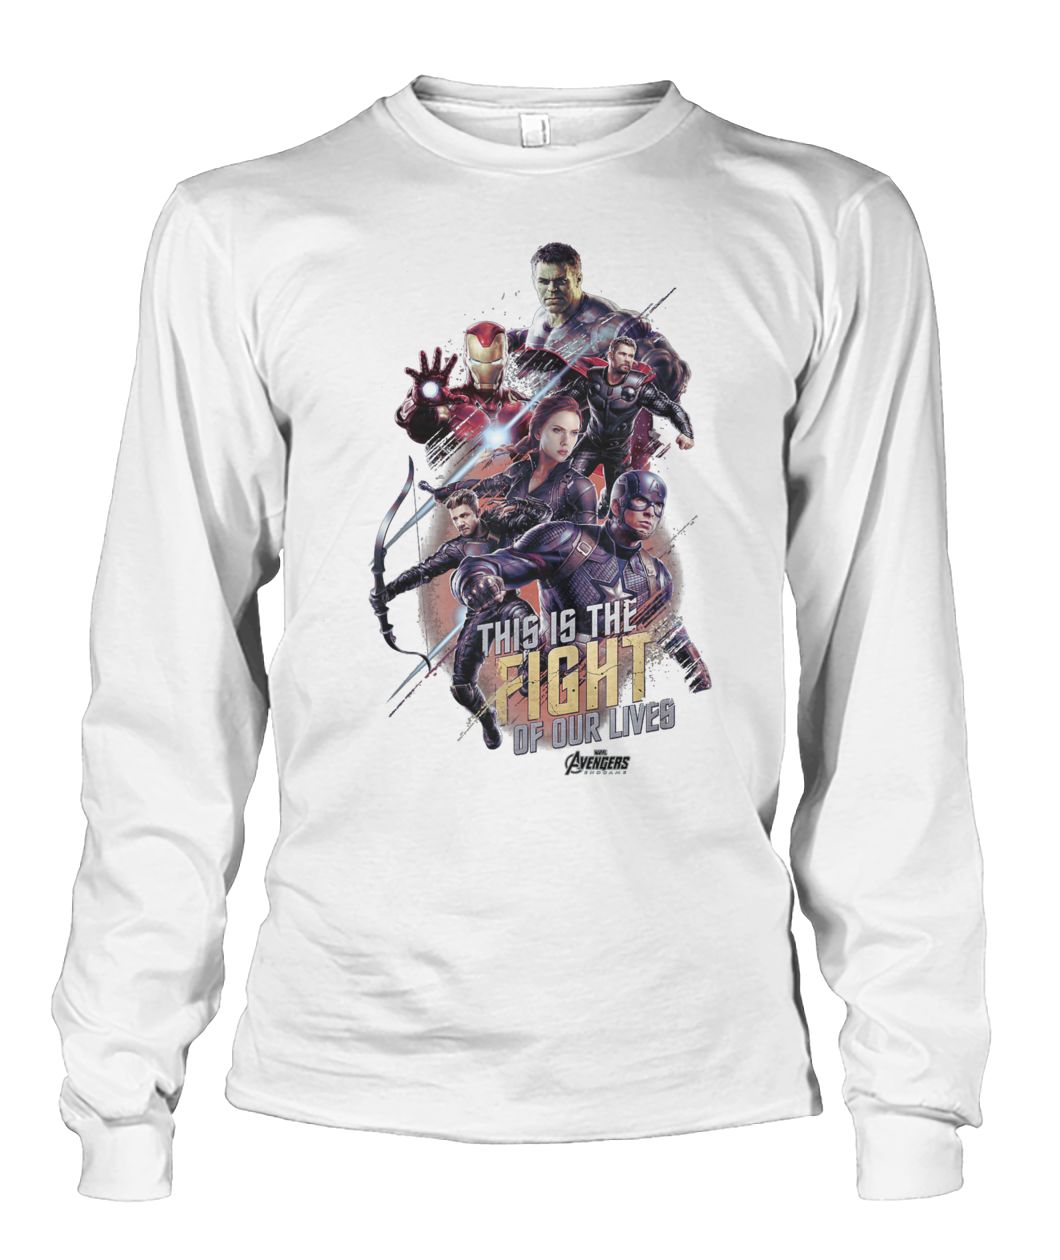 Marvel avengers endgame this is the fight of our lives unisex long sleeve